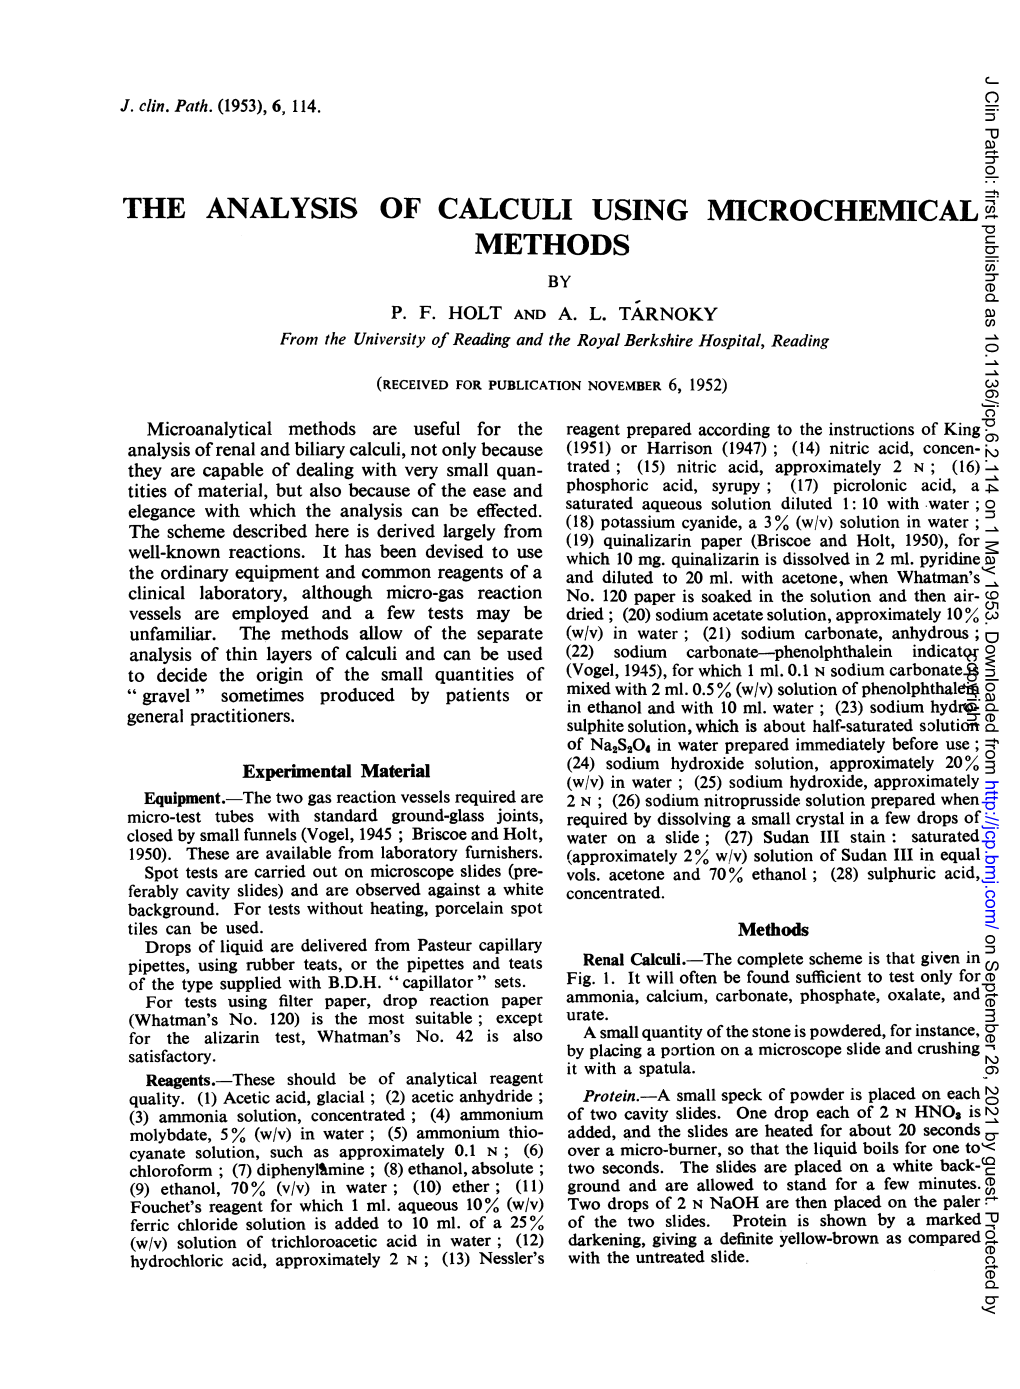 The Analysis Ofcalculi Using Microchemical Methods